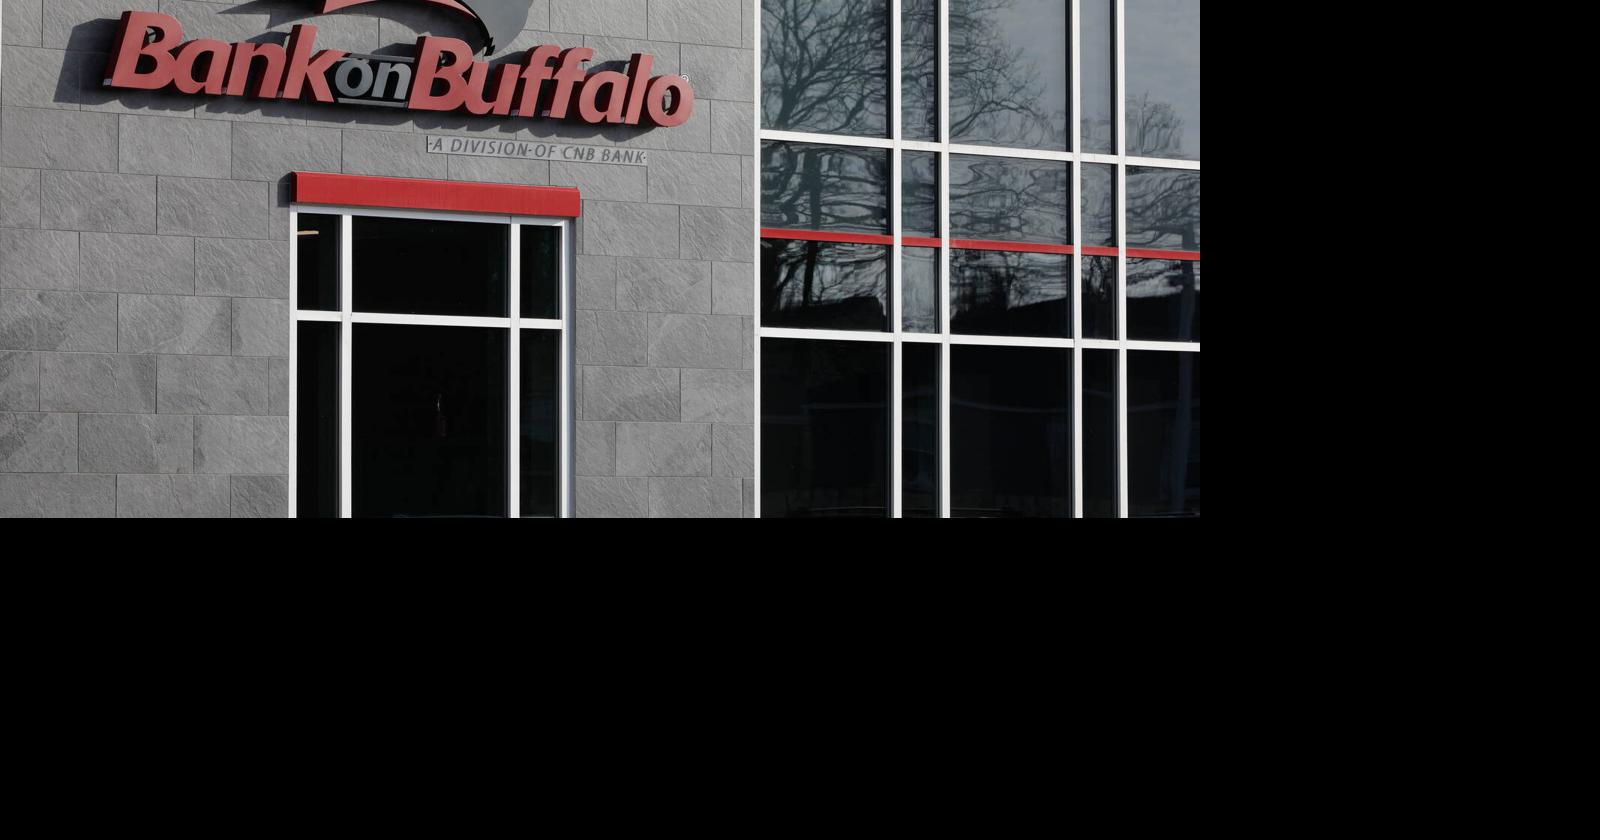 Bank on Buffalo plans to build branch where a Depew restaurant now stands